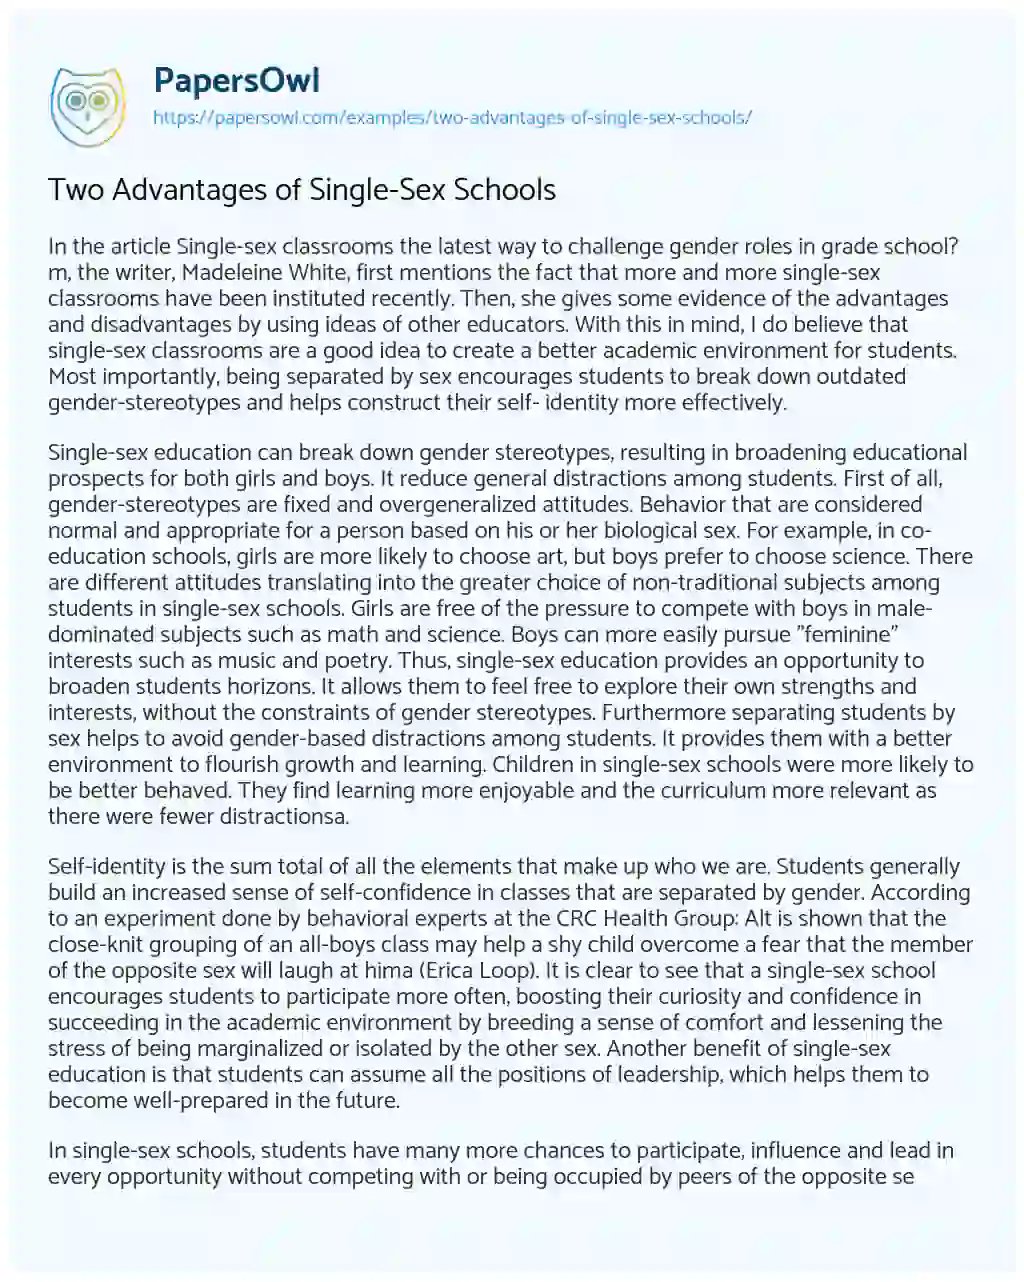 Essay on Two Advantages of Single-Sex Schools